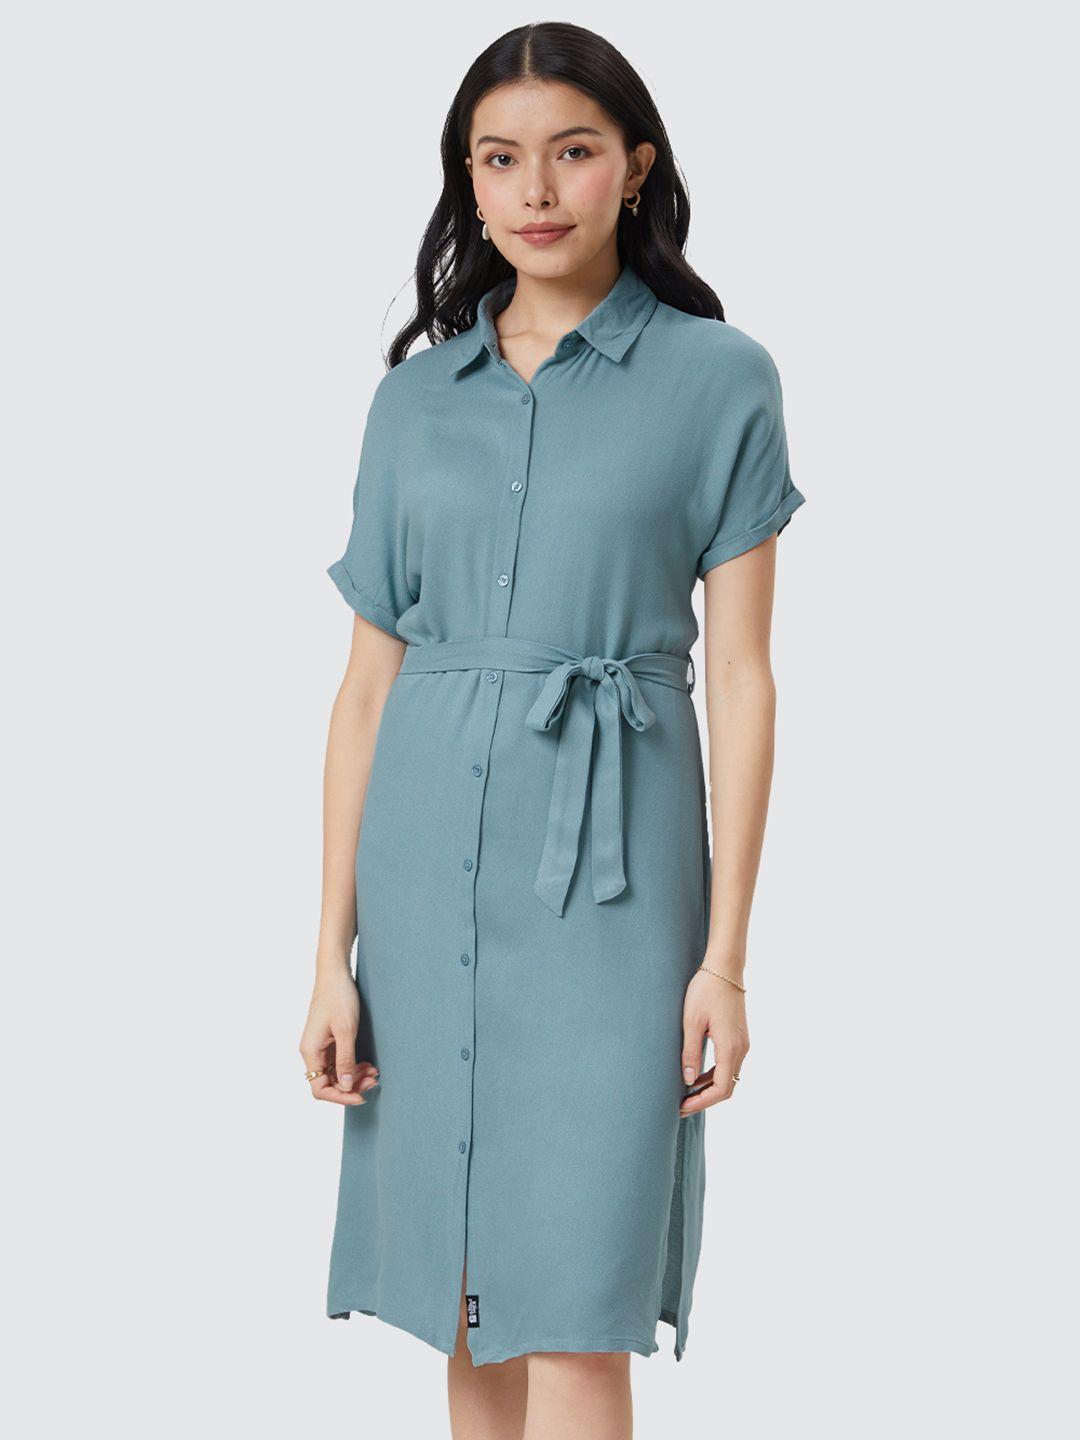 the-souled-store-grey-shirt-dress